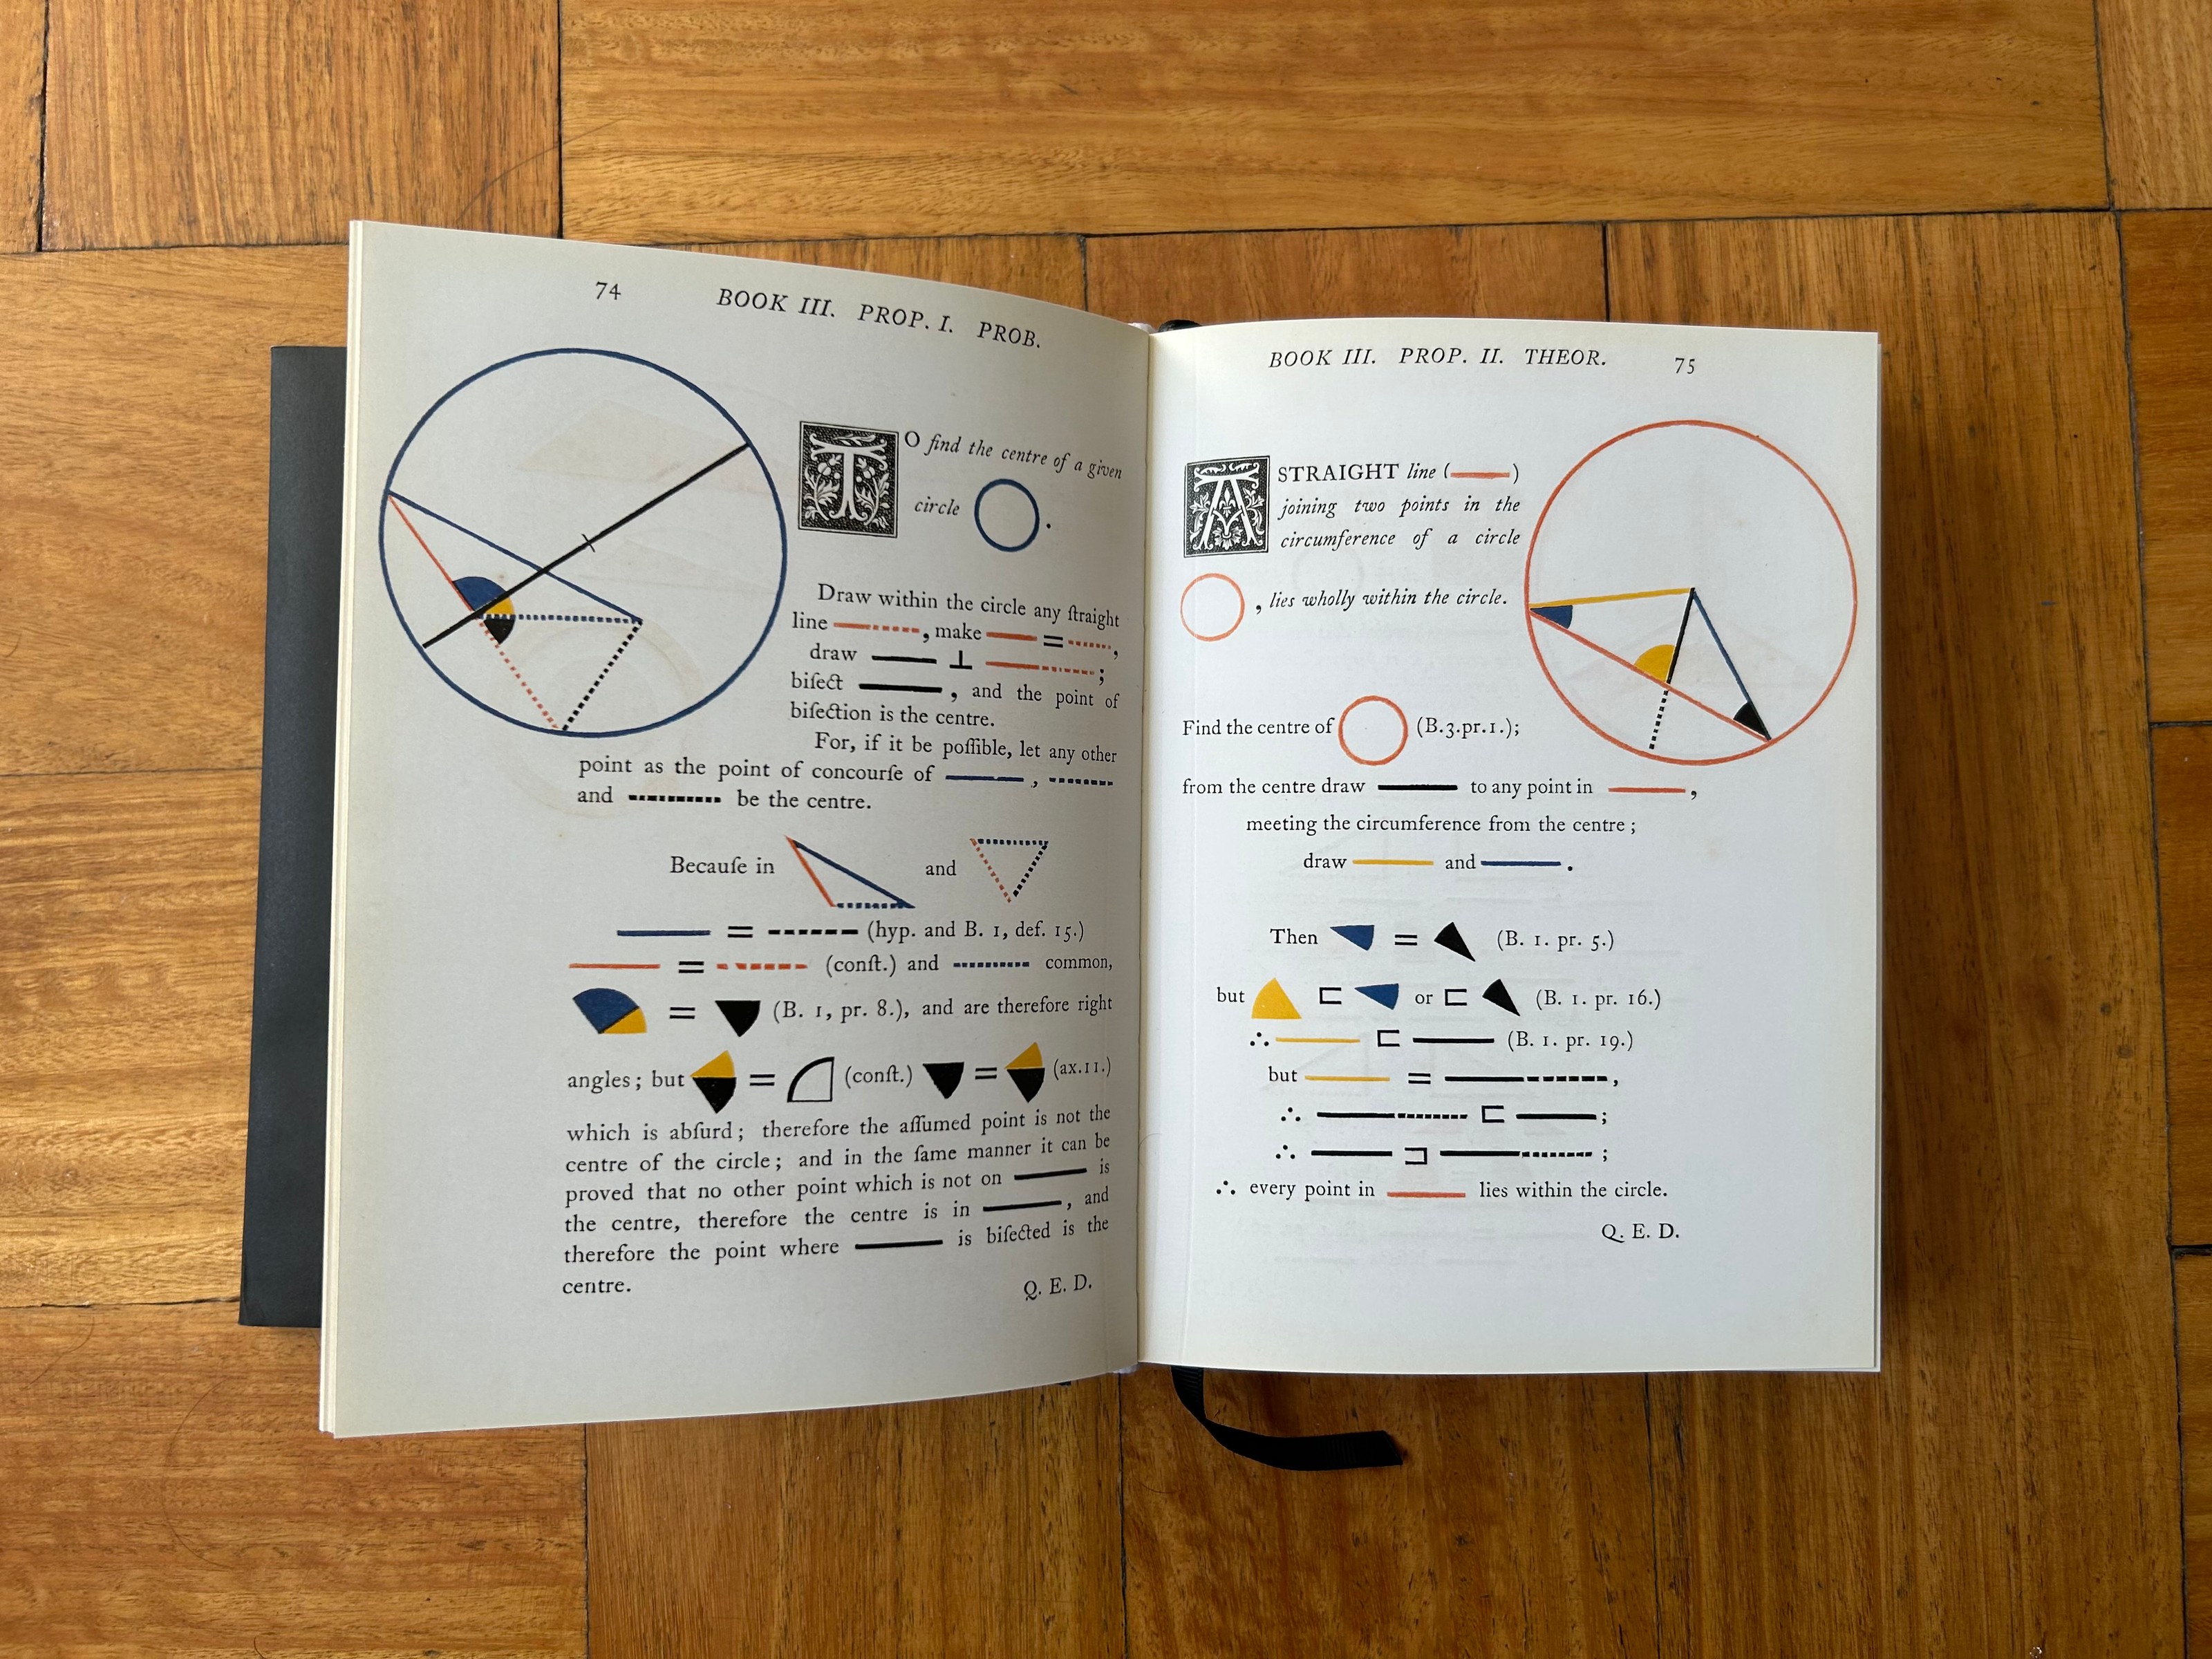 Photo of book open showing geometric diagrams of circles, against a wooden floor.